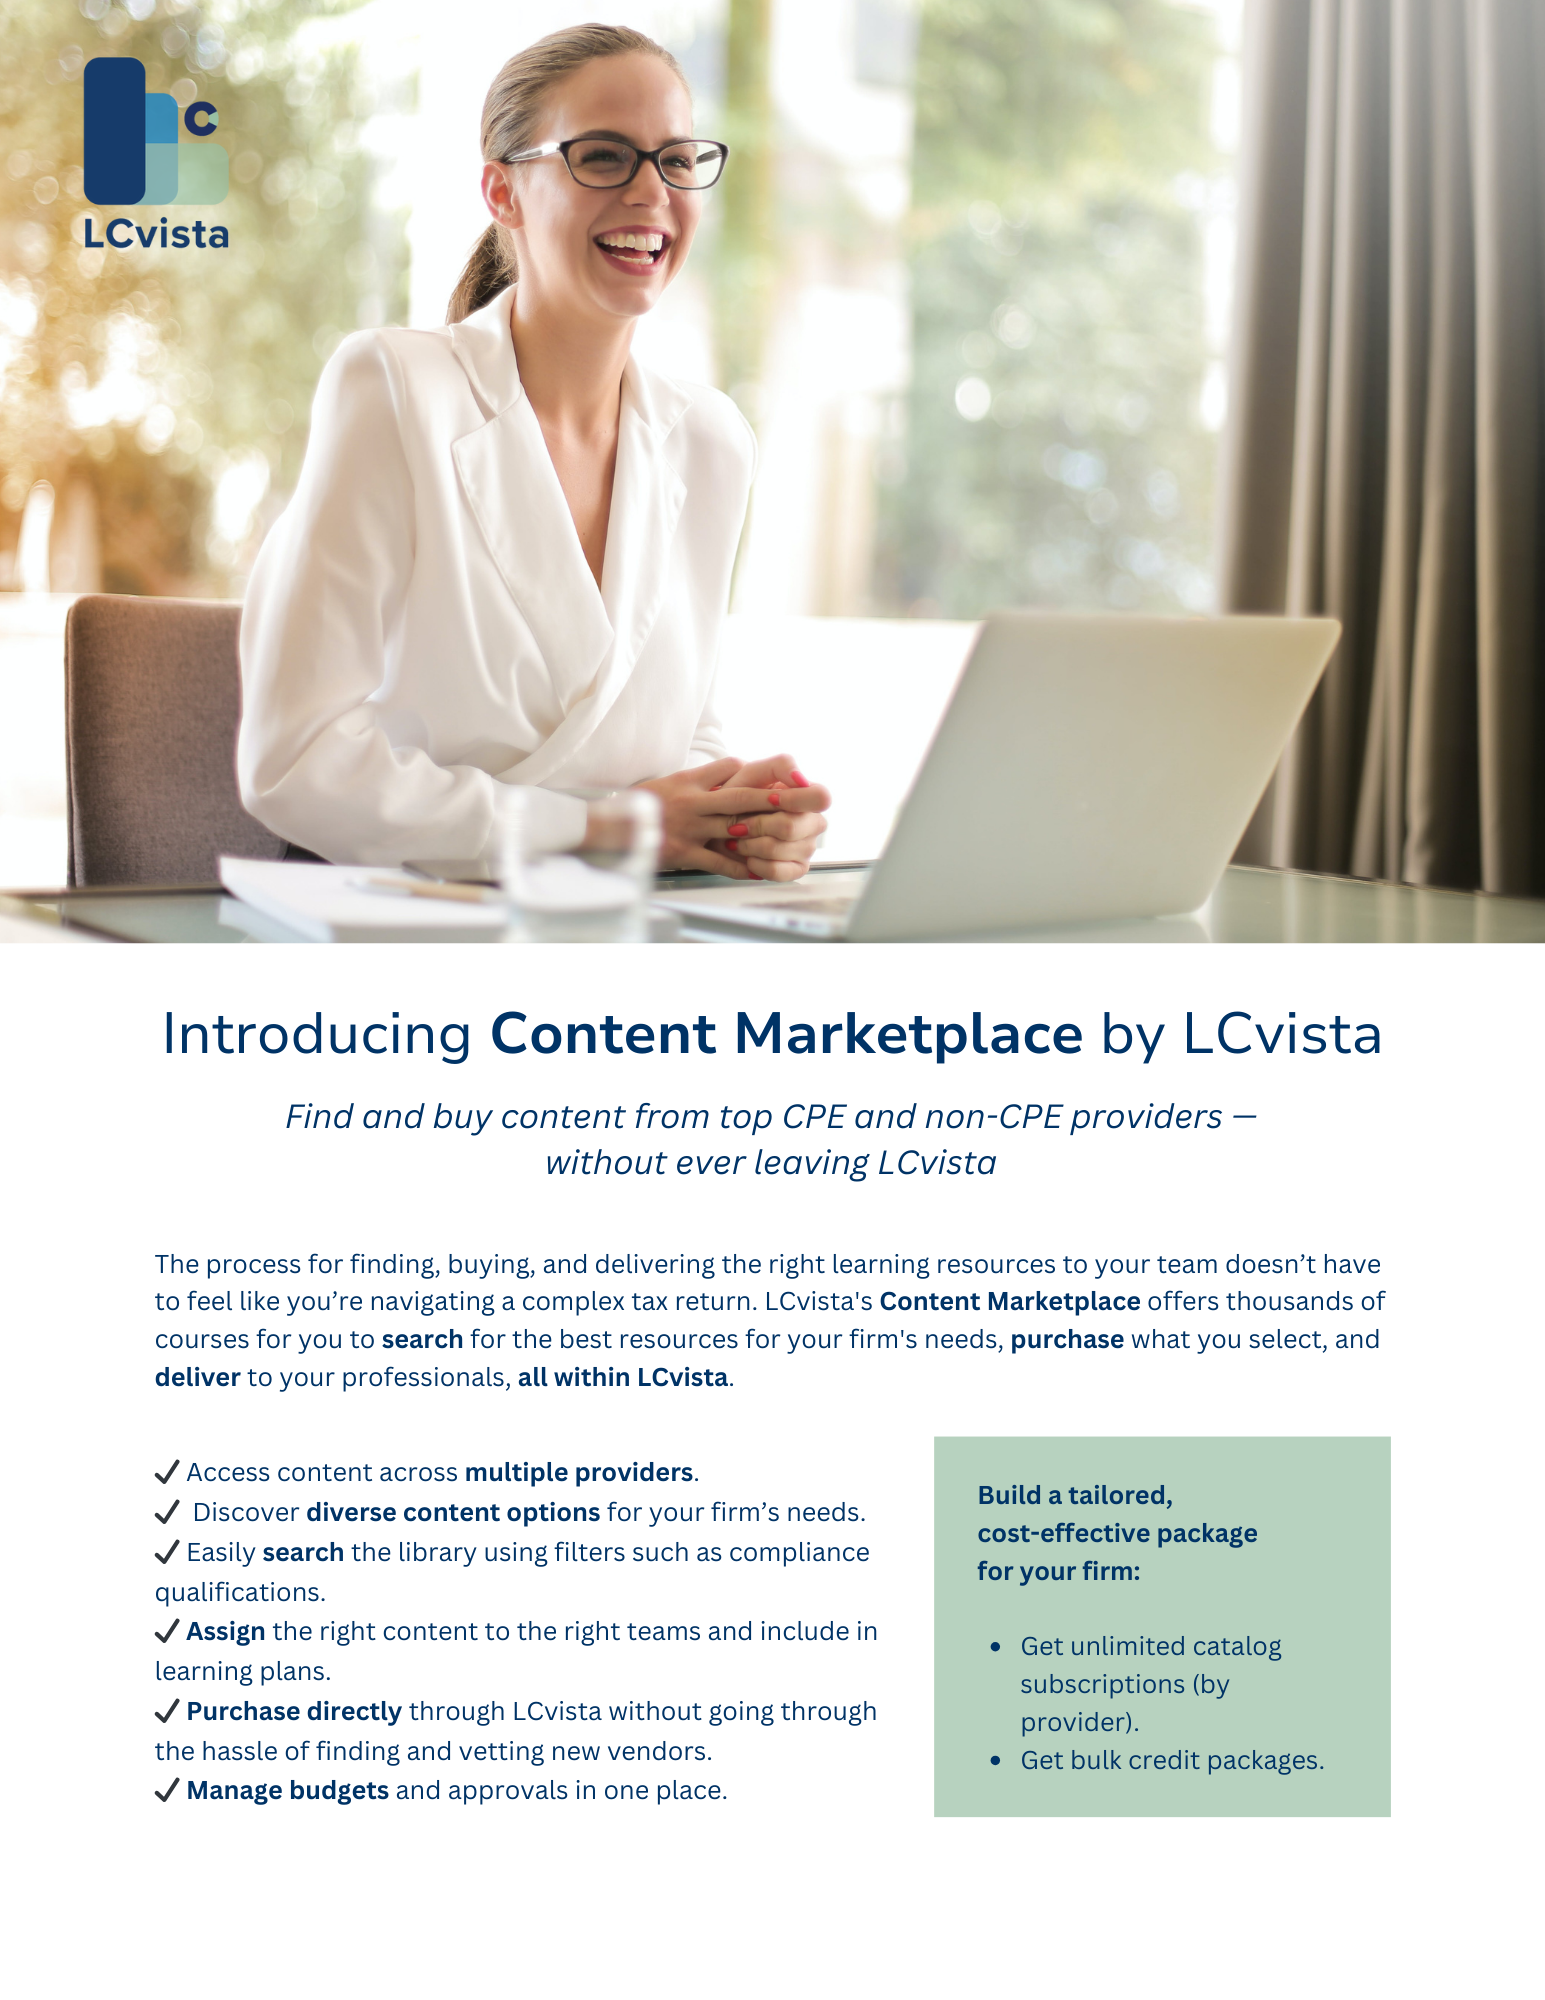 LCvista Content Marketplace page 1 updated March 12 24